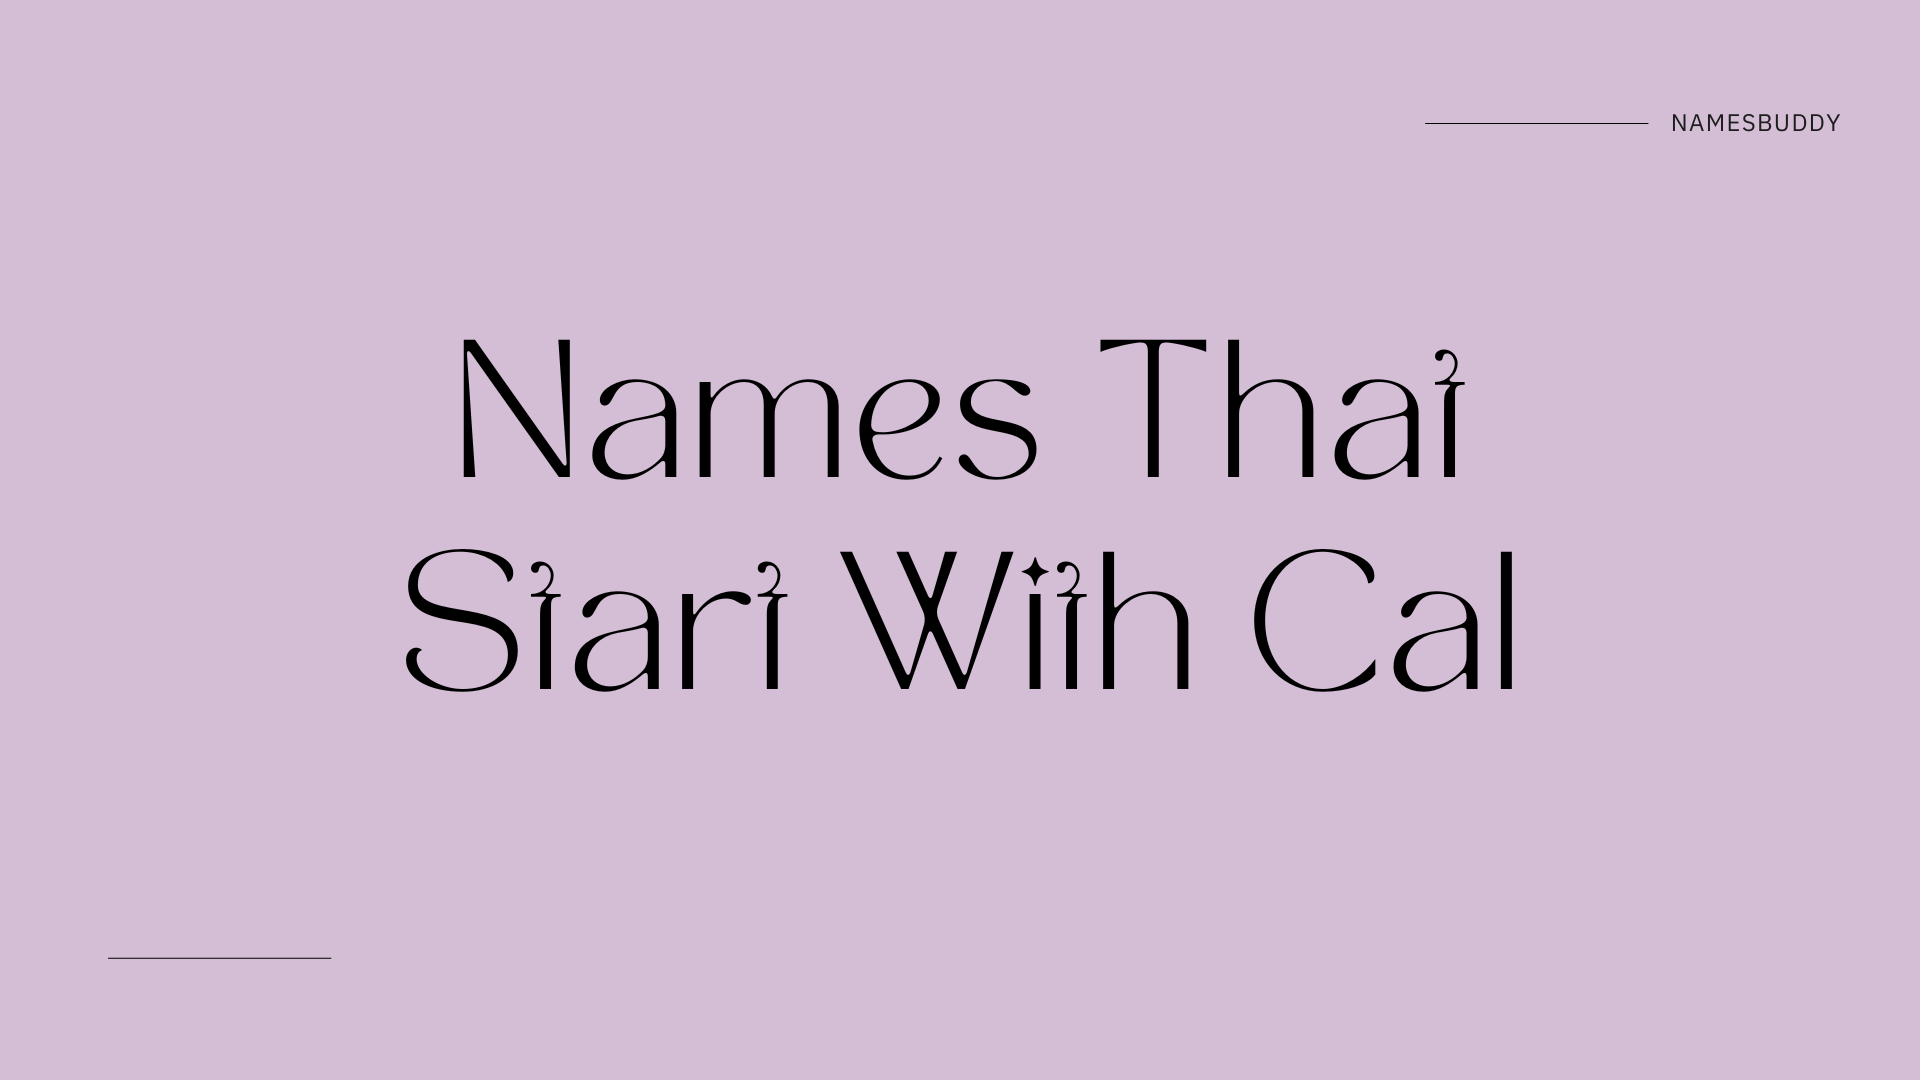 49 Names That Start With Cal – NamesBuddy